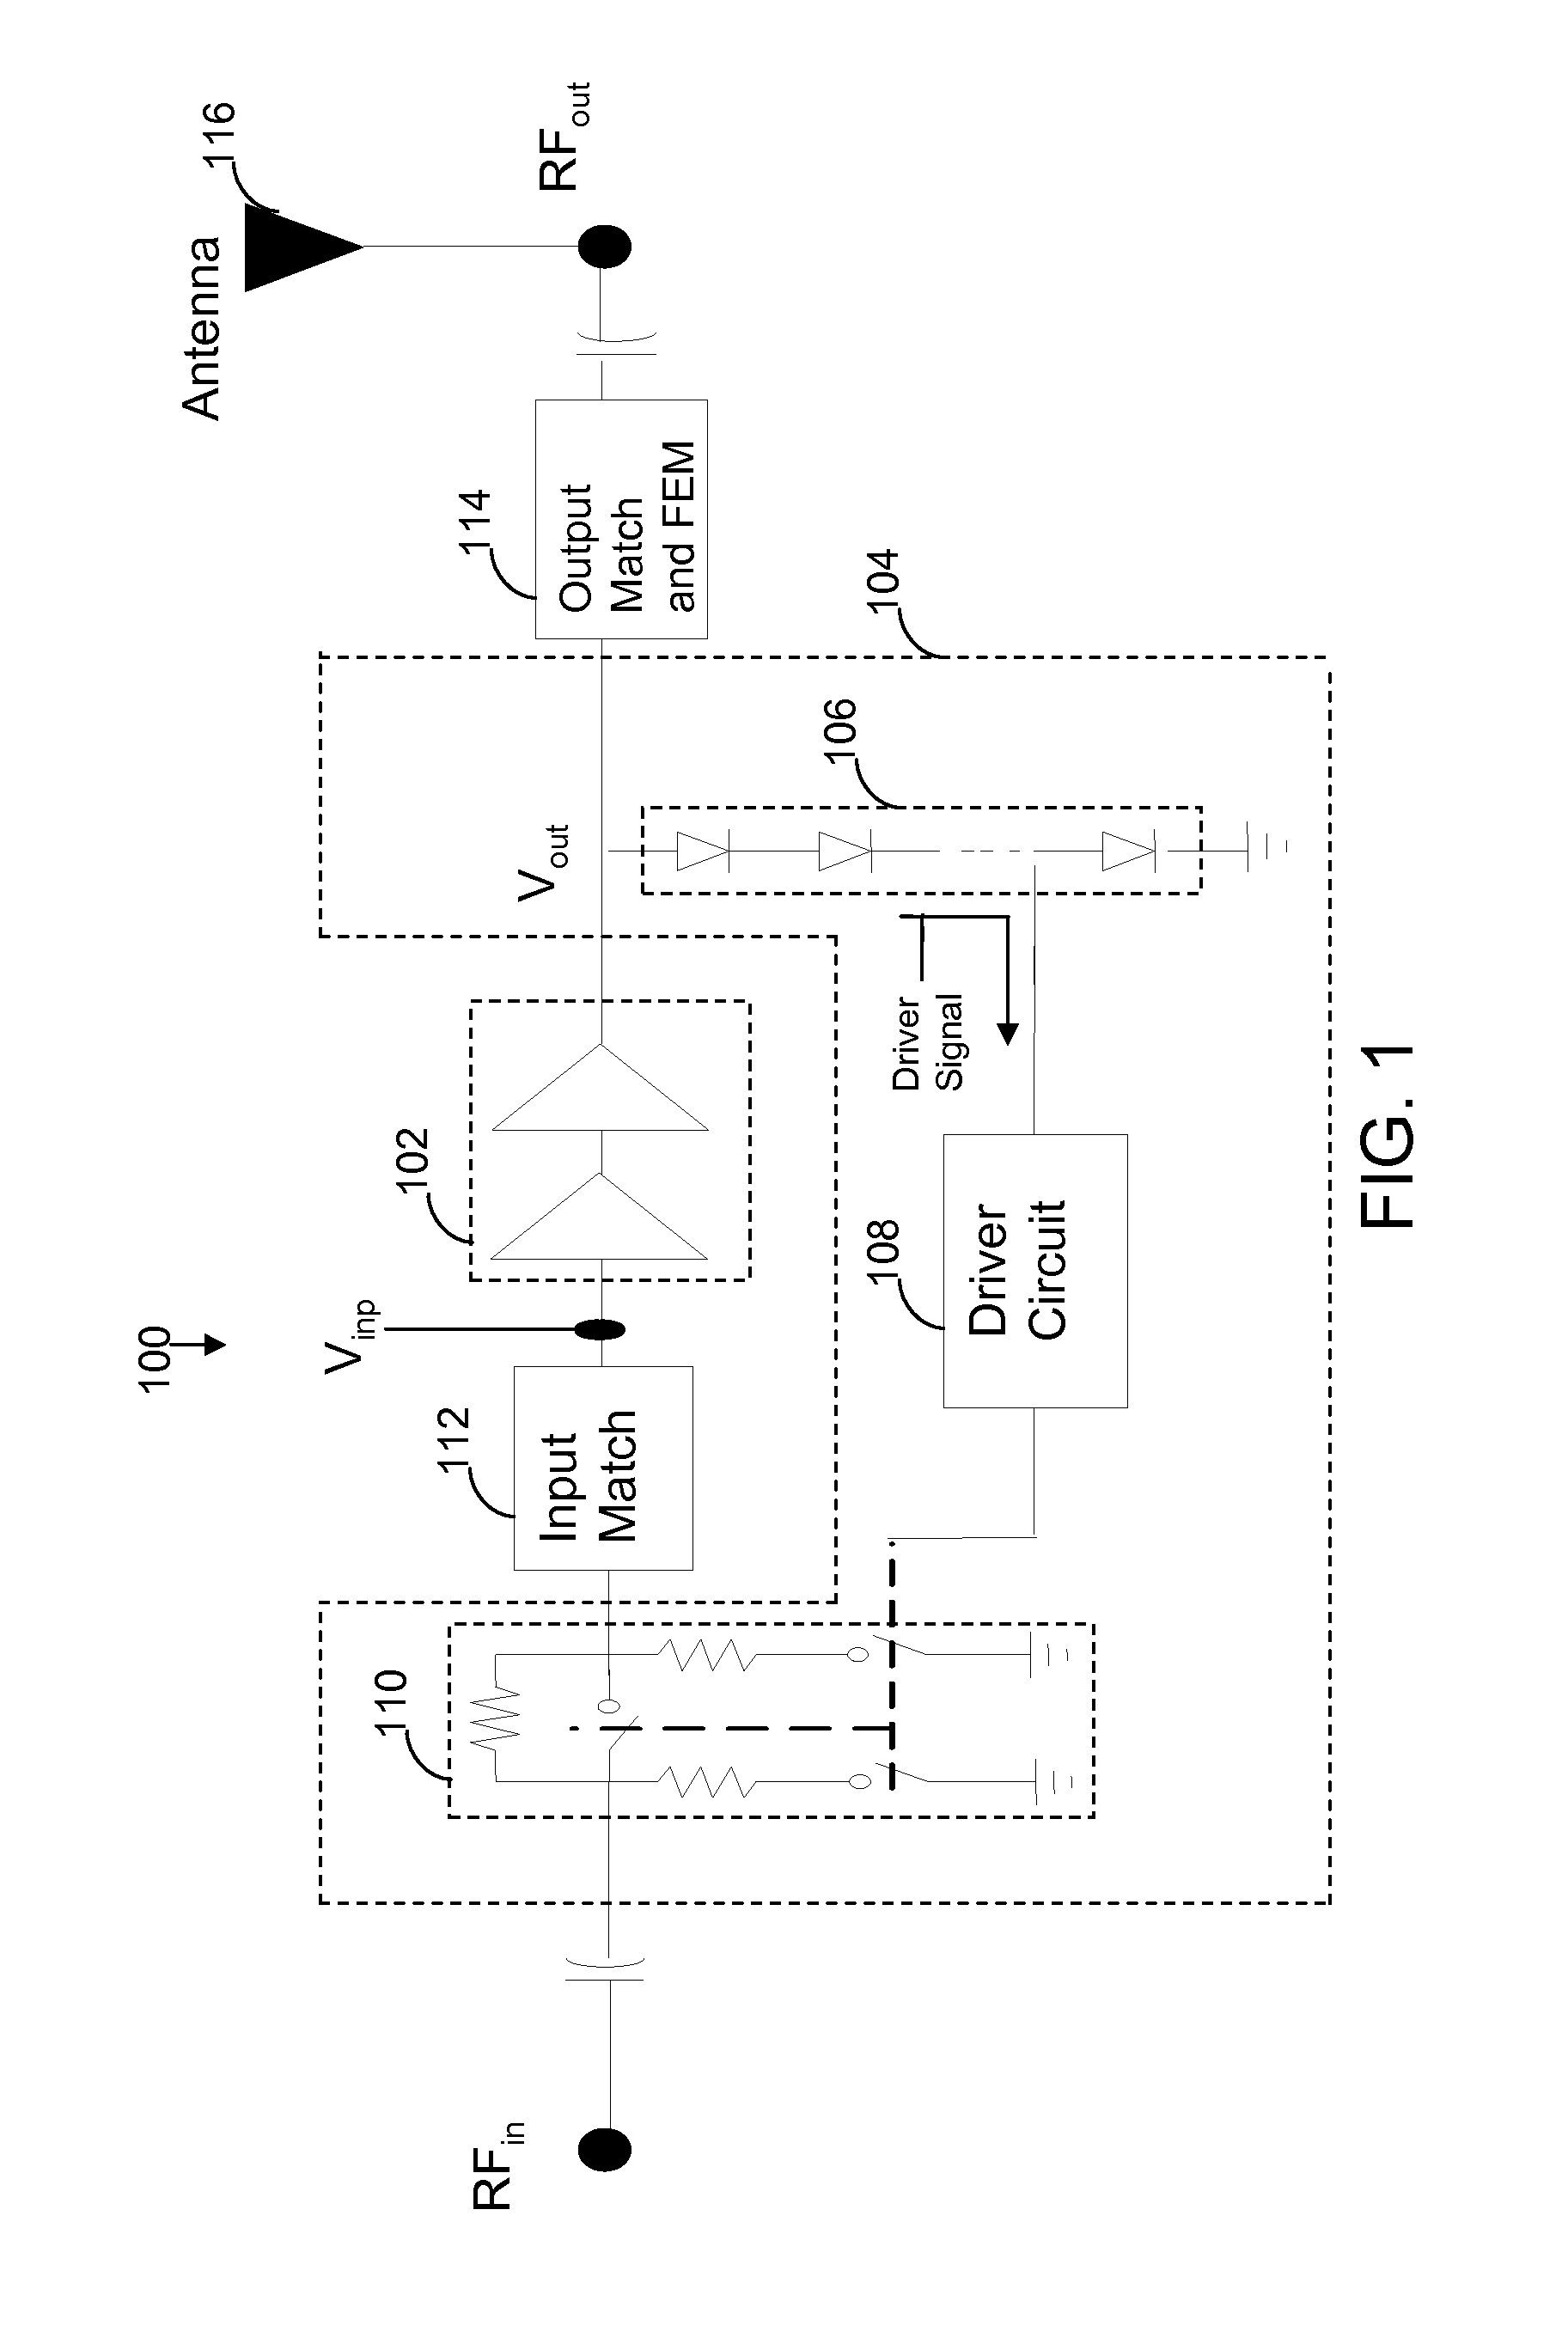 Power amplifier protection circuit